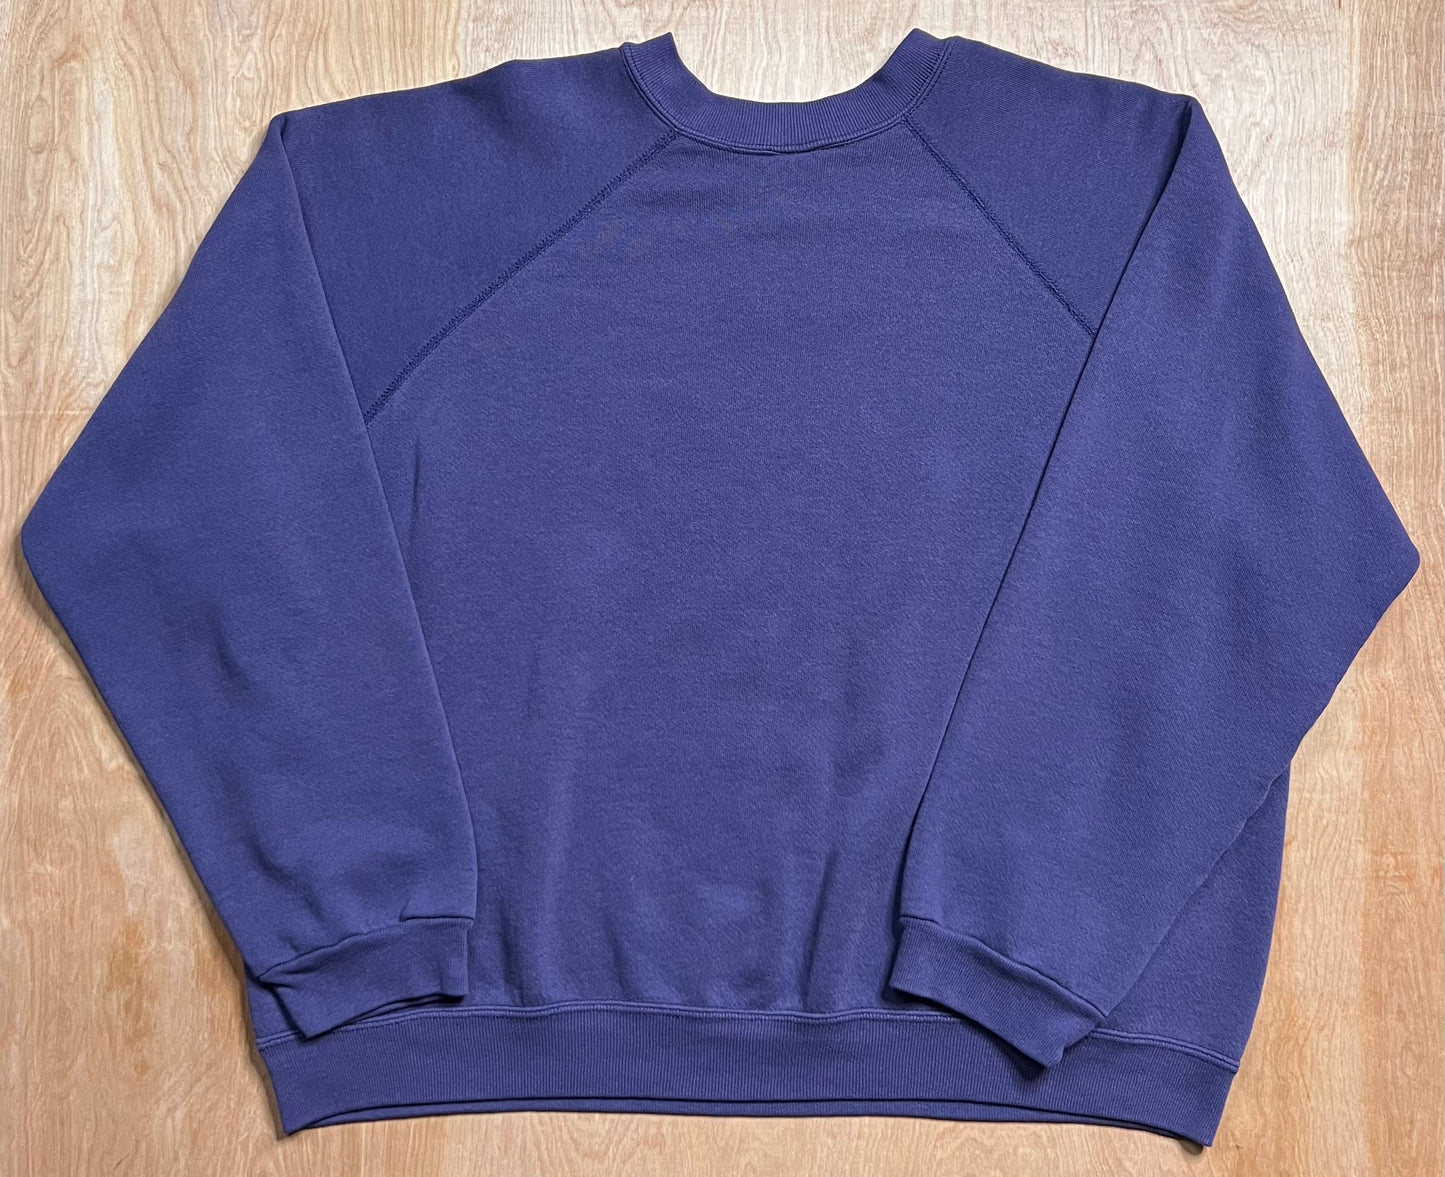 Early 1990's Sweats Appeal by Tultex Blank Crewneck